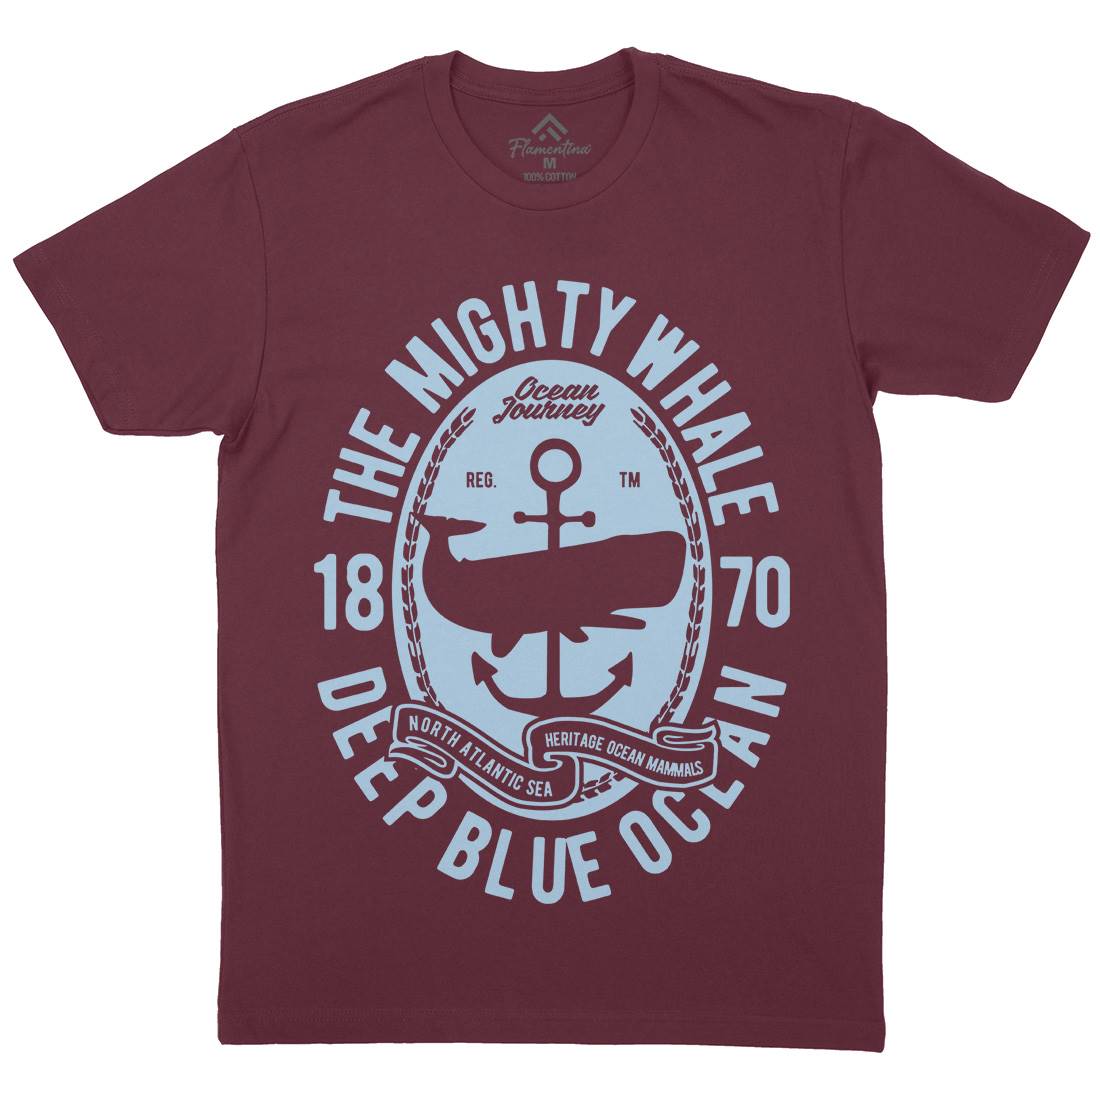 The Mighty Whale Mens Crew Neck T-Shirt Navy B466